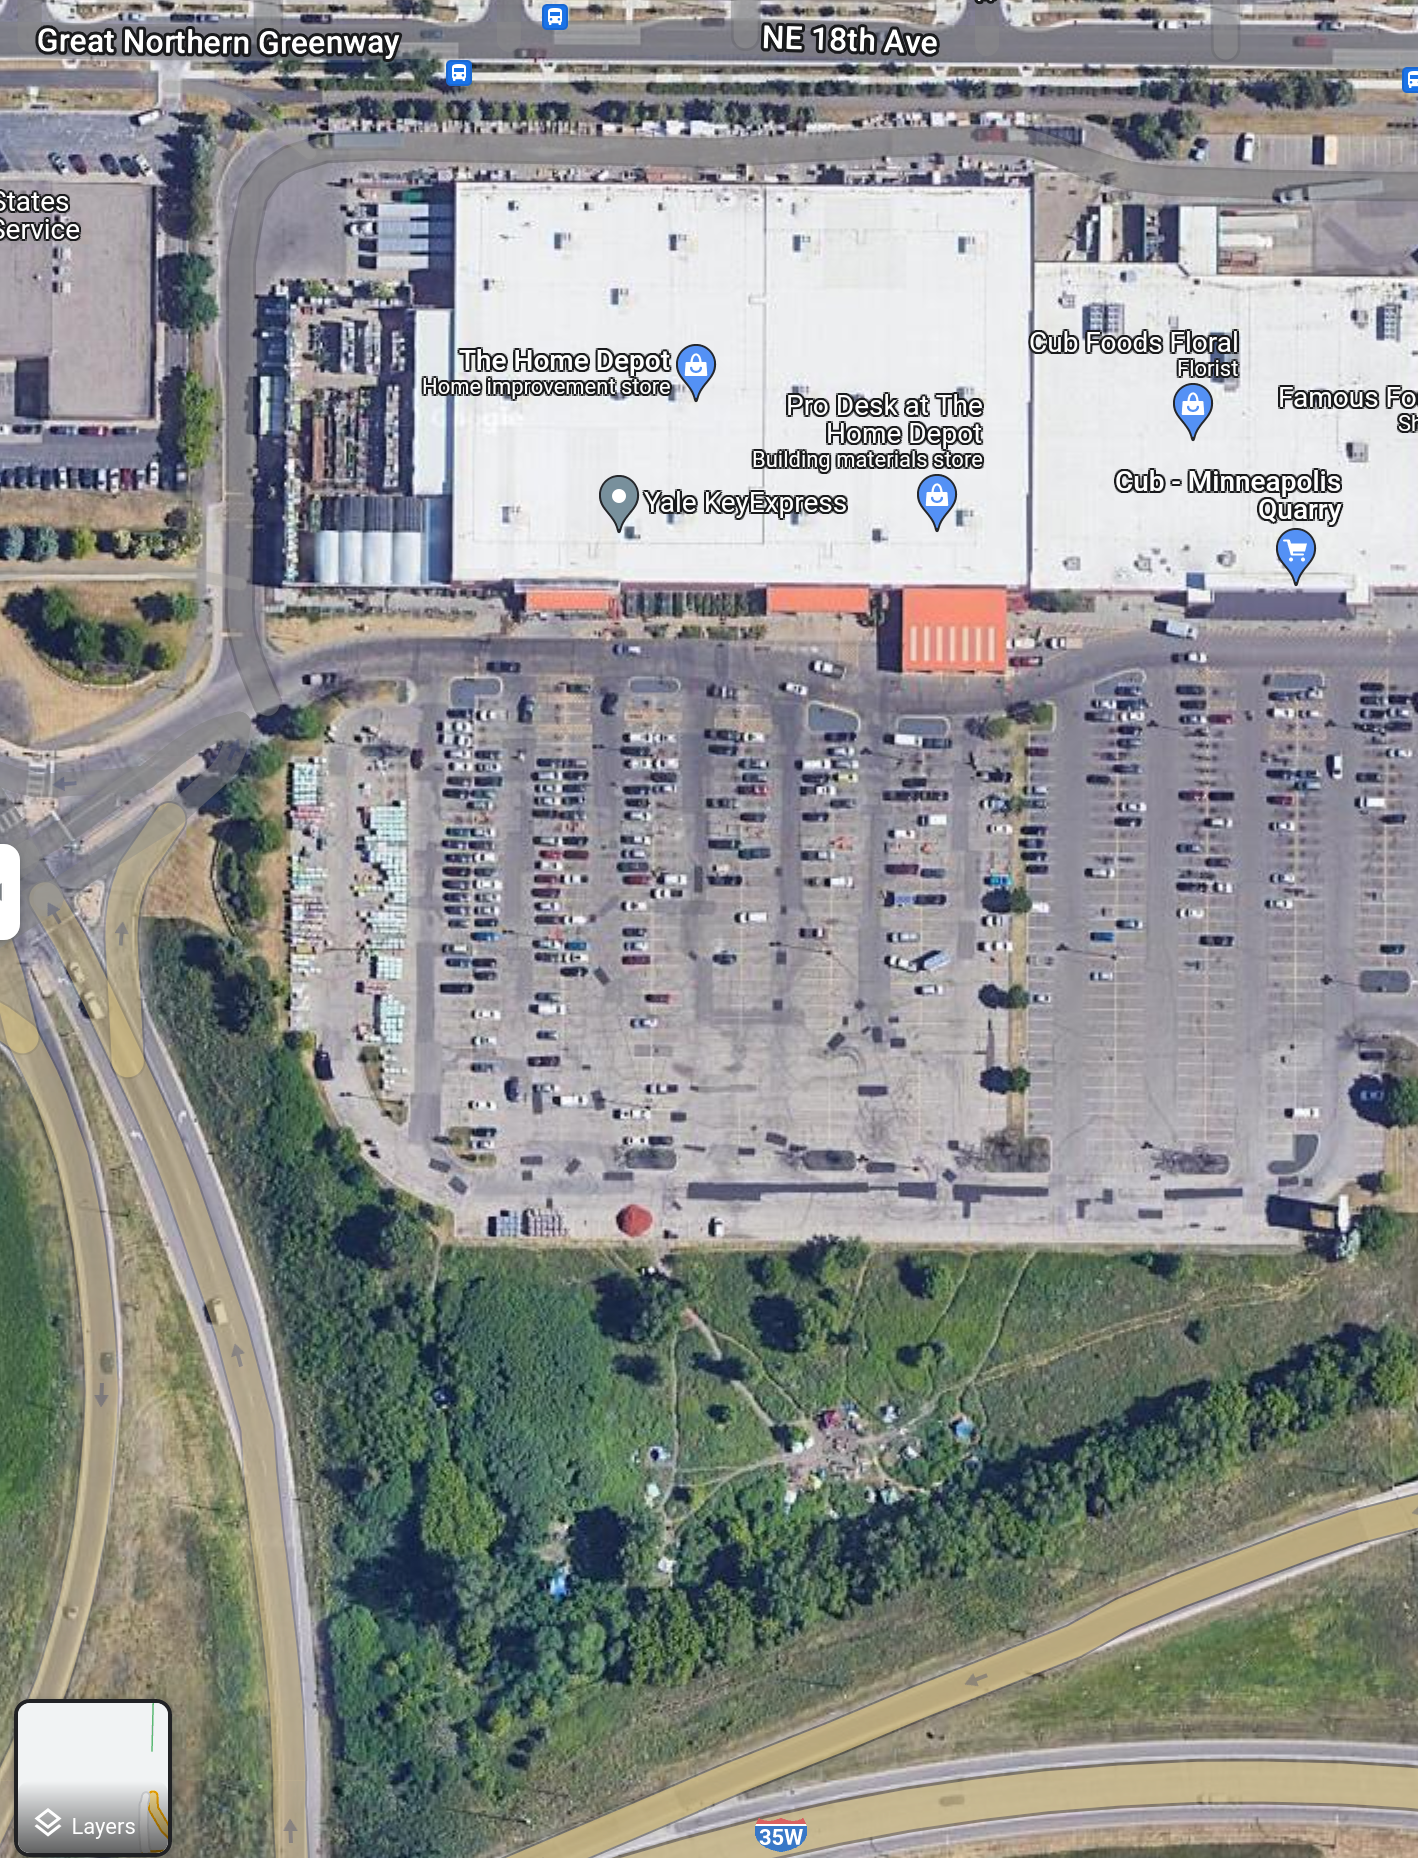 An overhead satellite image of a large parking lot, with the tents of Quarry Encampment to the South (at the bottom of the image, below the parking lot and above 35W) and The Home Depot and Cub buildings labeled to the North, beneath Great Northern Greenway / NE 18th Ave.